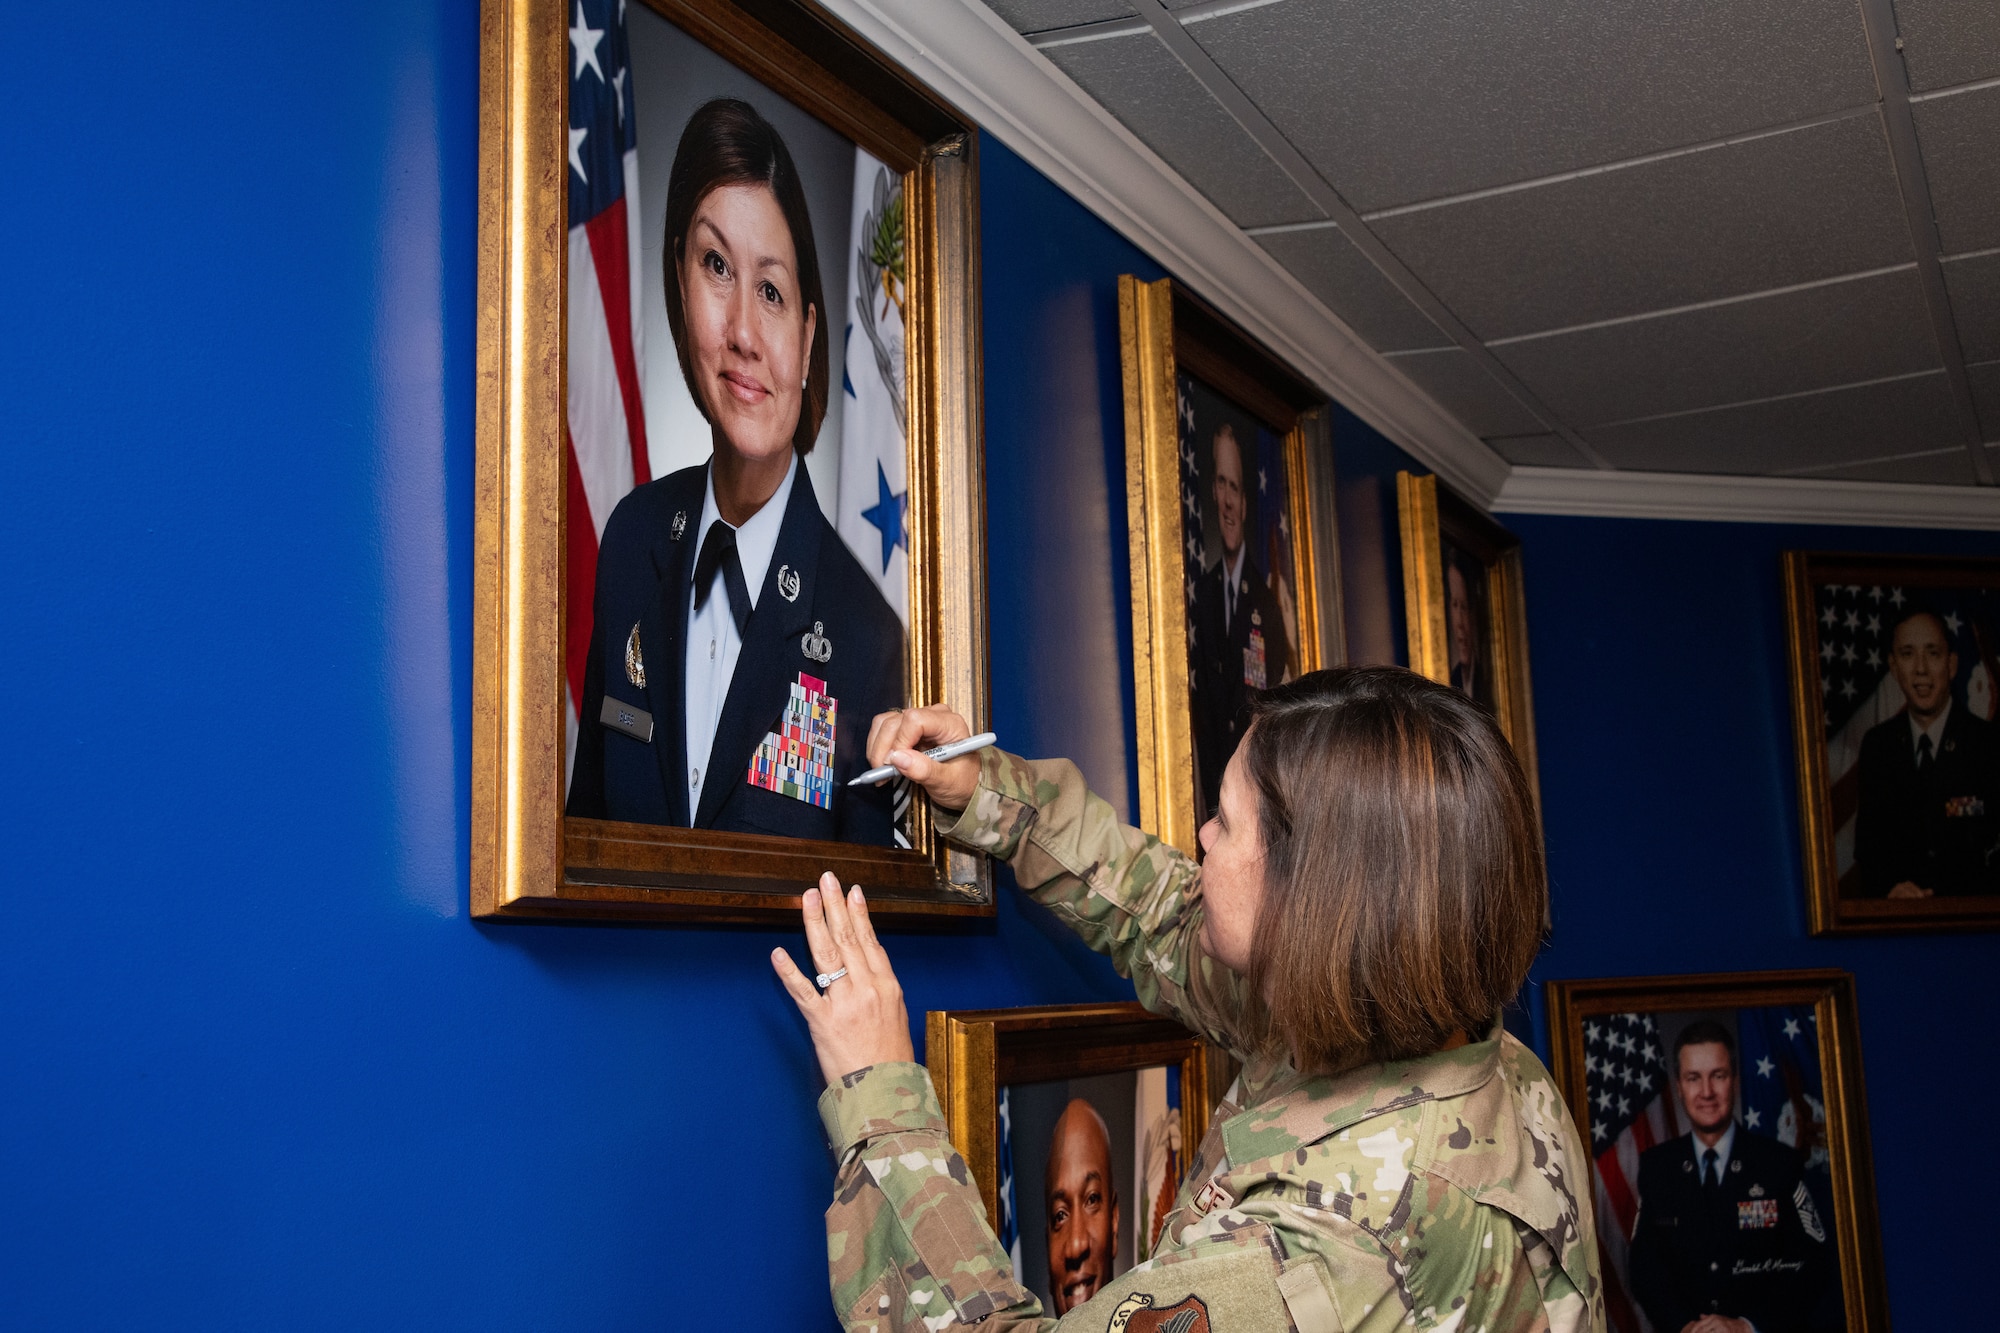 Chief Master Sgt. of the Air Force JoAnne S. Bass visits the Enlisted Heritage Research Institute to view and sign her official photo Sept. 23, 2020, on Maxwell Air Force Base's Gunter Annex. While visiting AU, Bass spoke with AF First Sergeant Academy students and shared her priorities; people, readiness and culture. (US Air Force photo by Cassandra Cornwell)